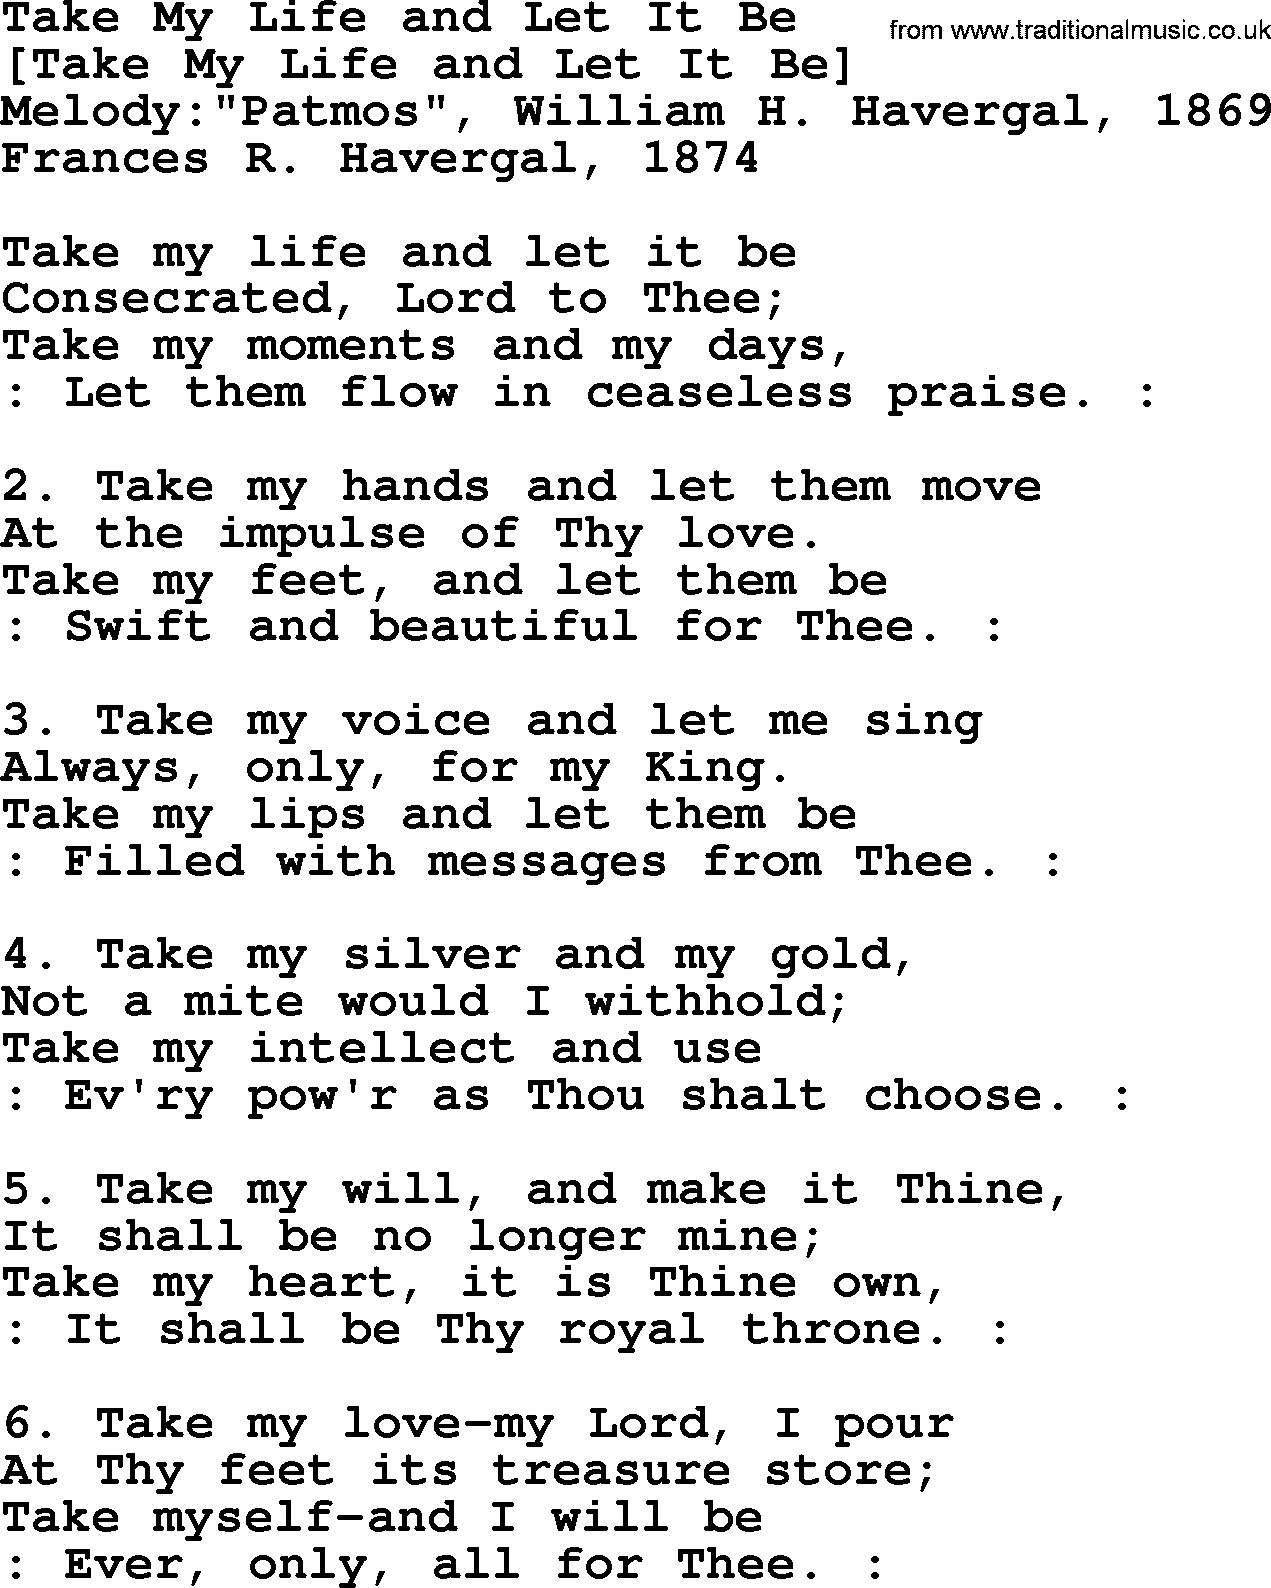 Old English Song: Take My Life And Let It Be lyrics